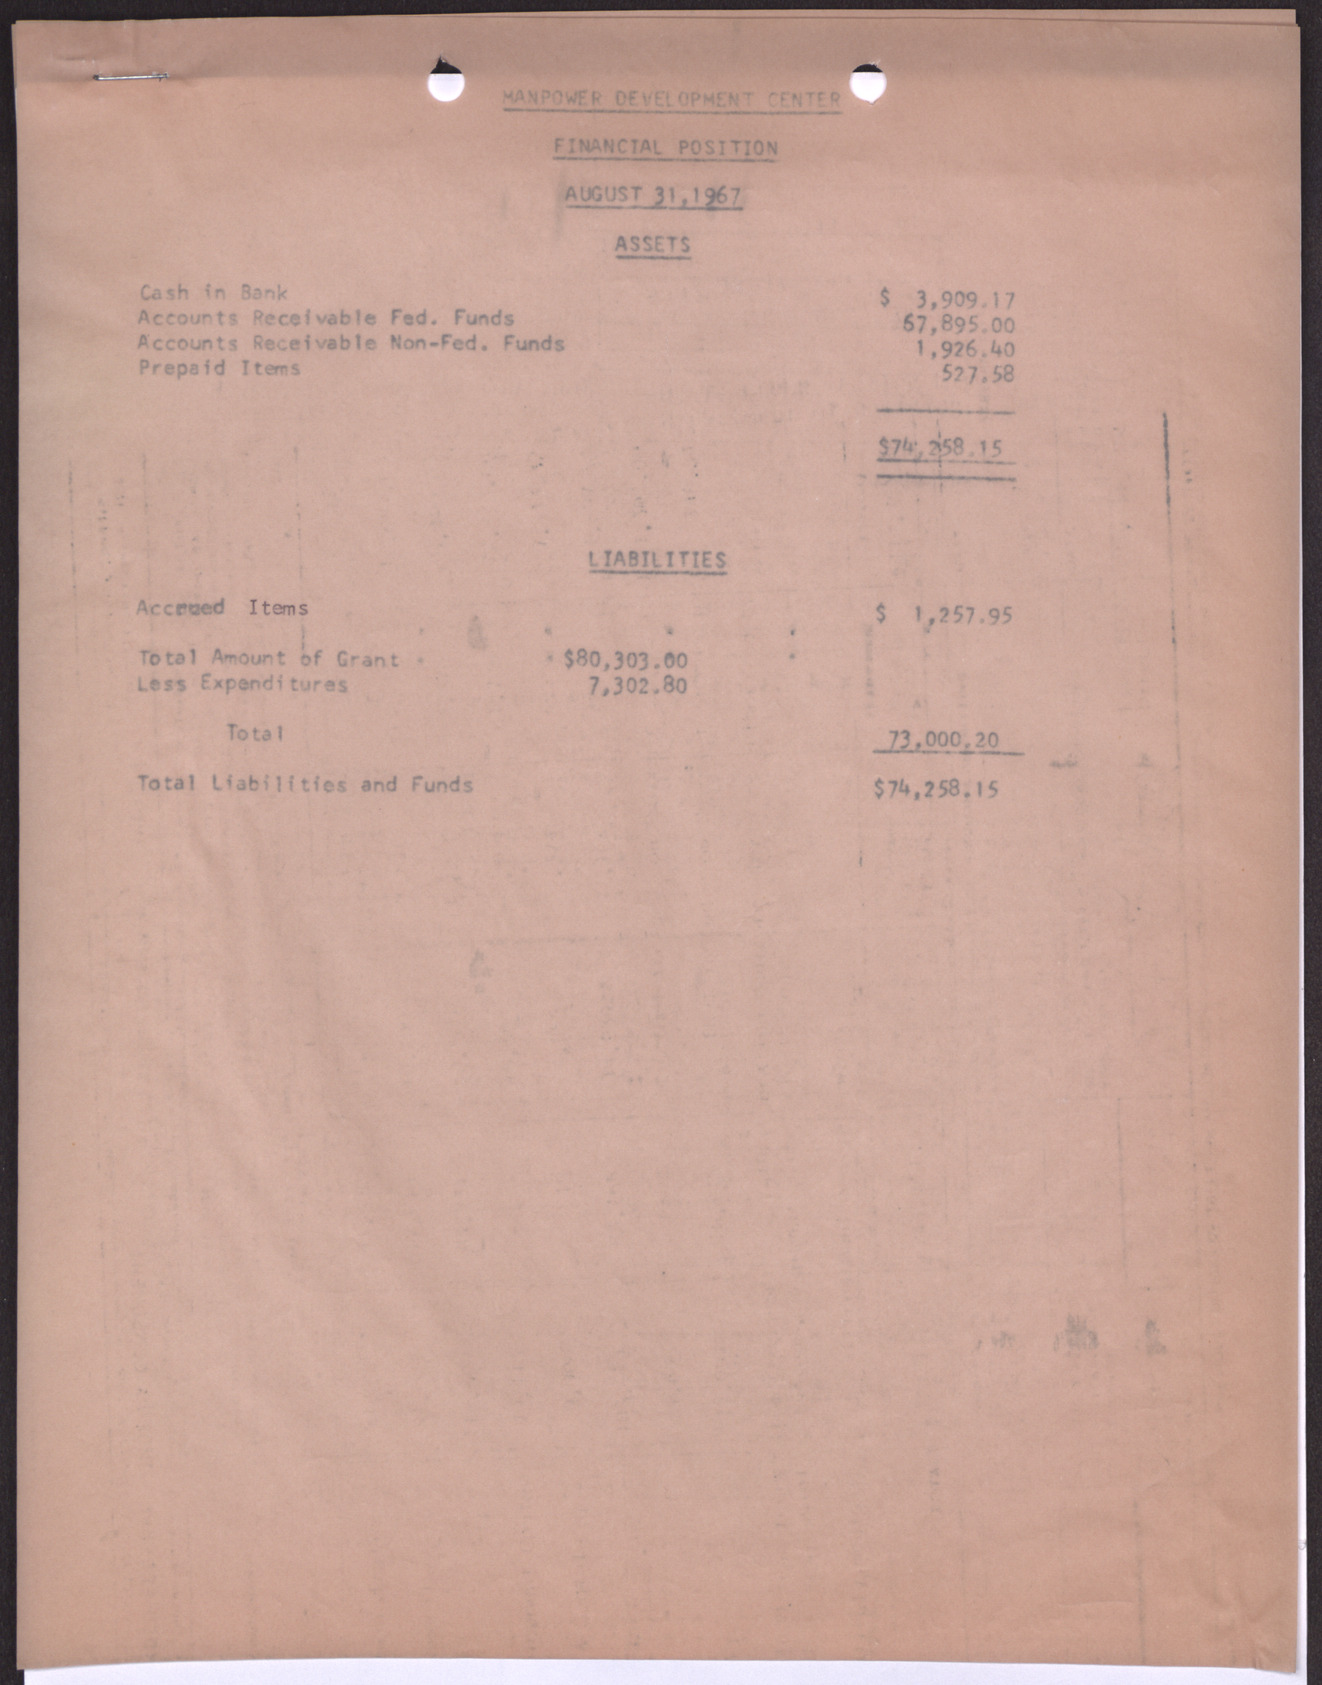 Financial Position form, August 31, 1967